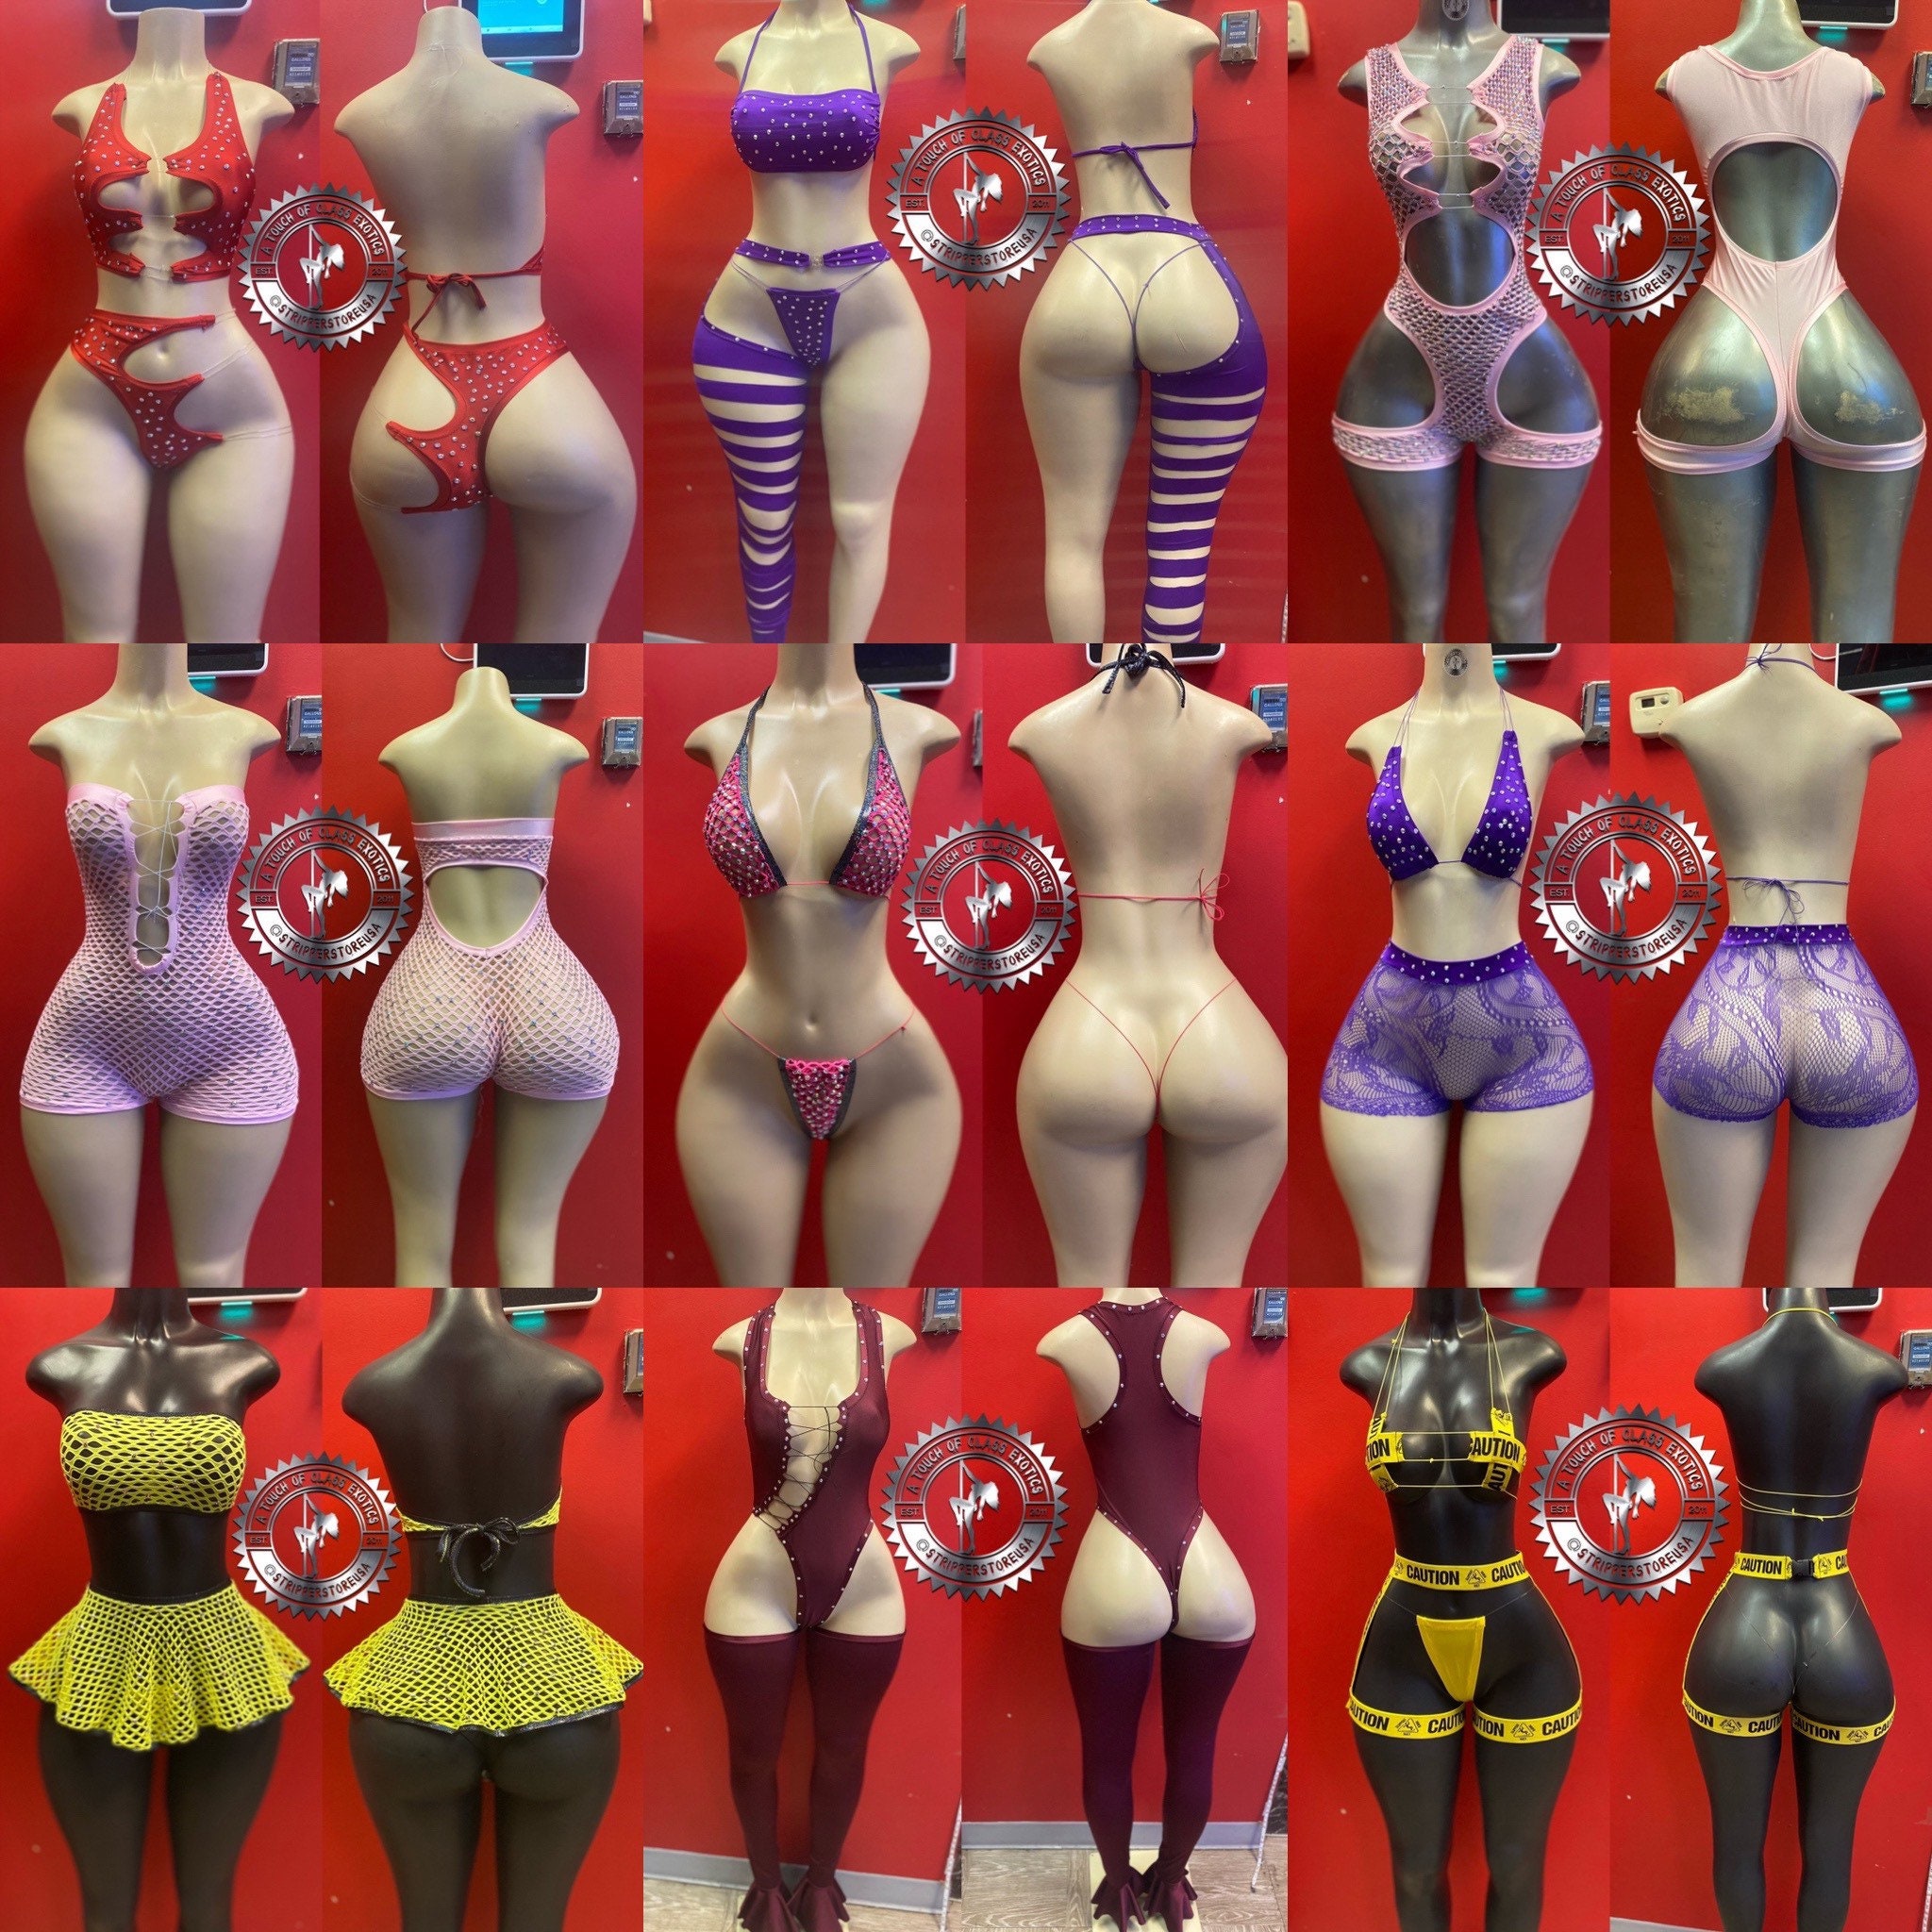 Wholesale 20 Custom Outfits Stripper Outfit Stripper Wear - Etsy